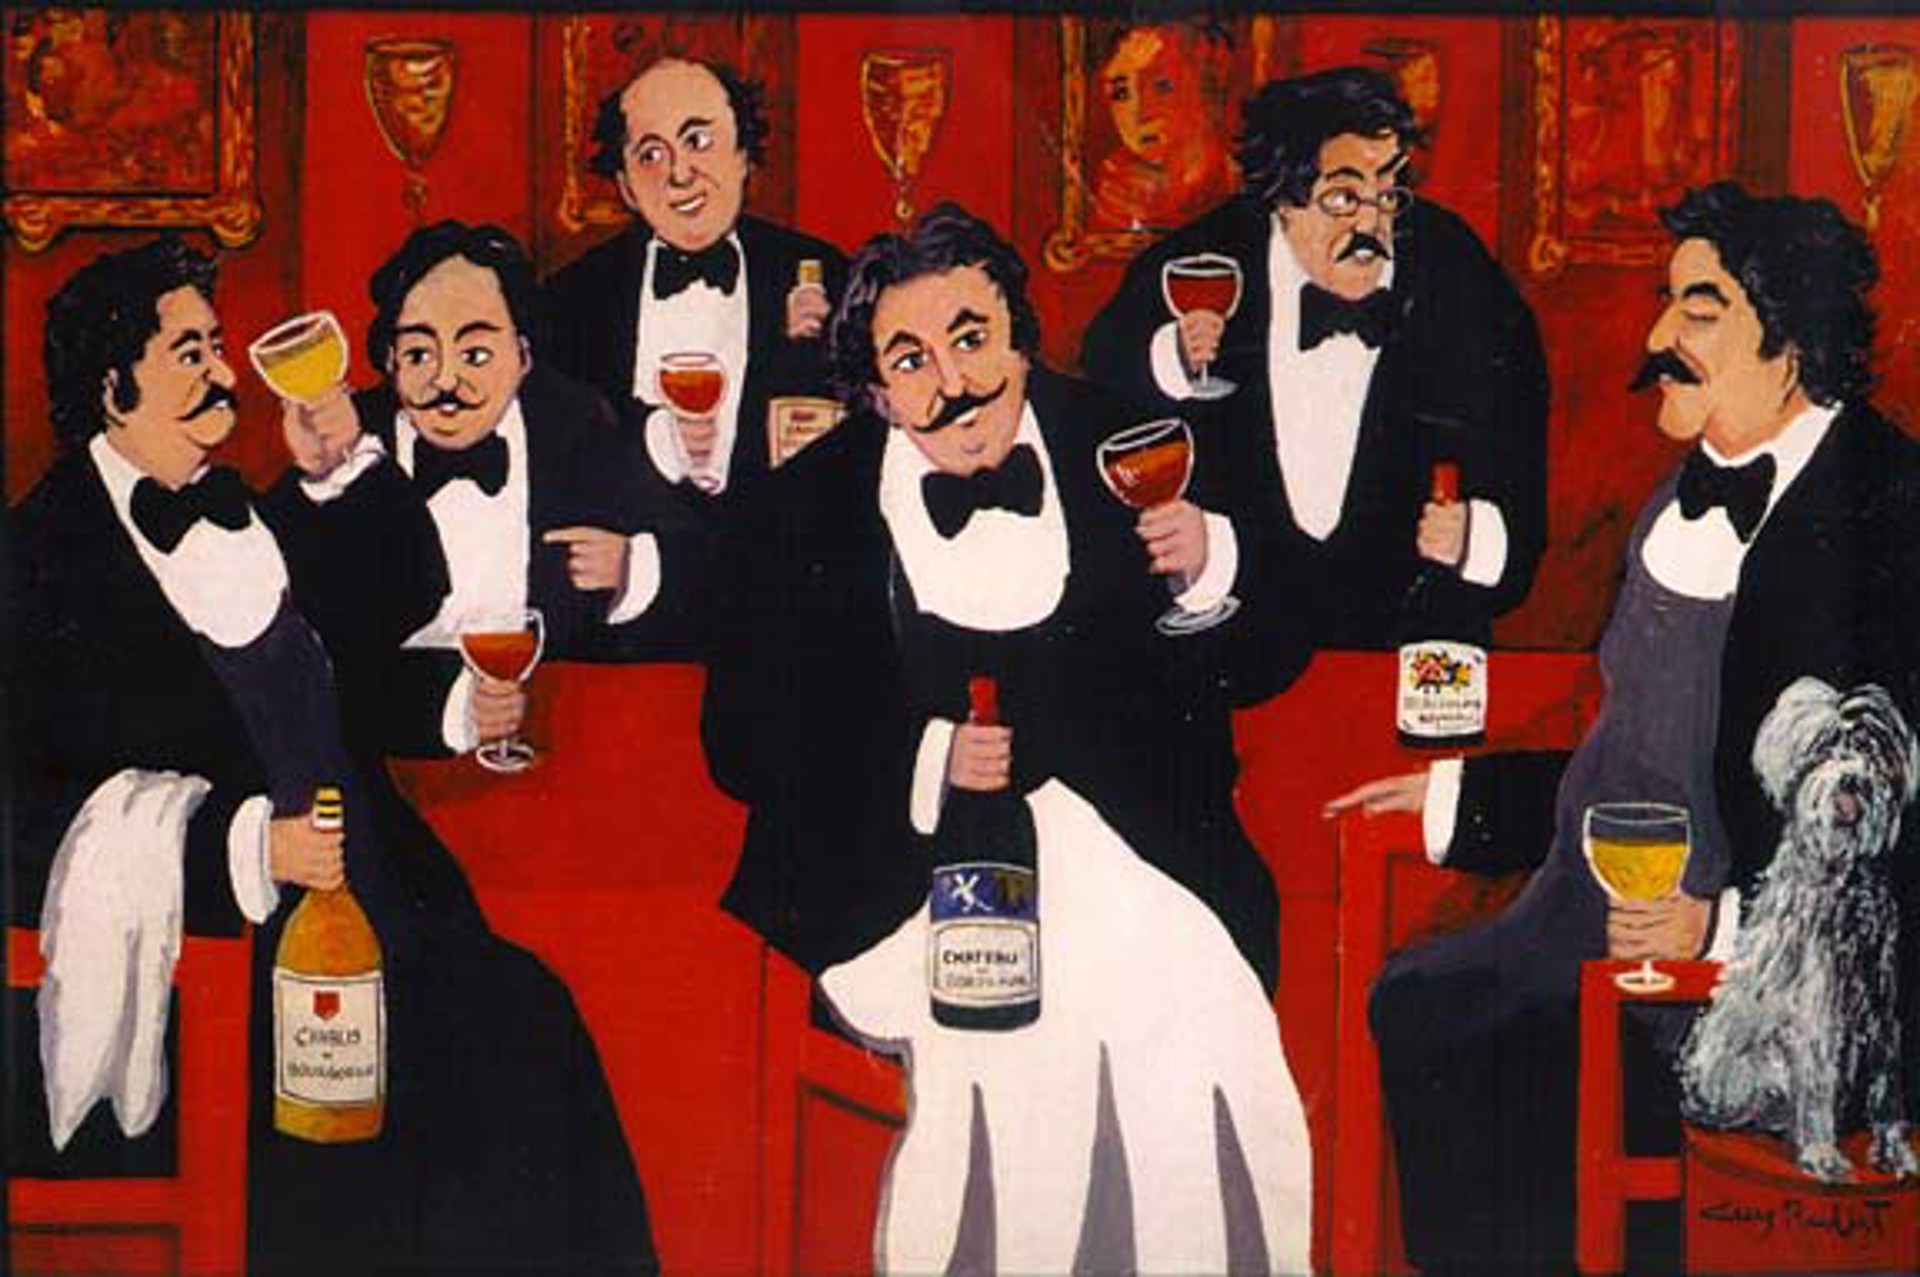 Gathering Of Connoisseurs by Guy Buffet